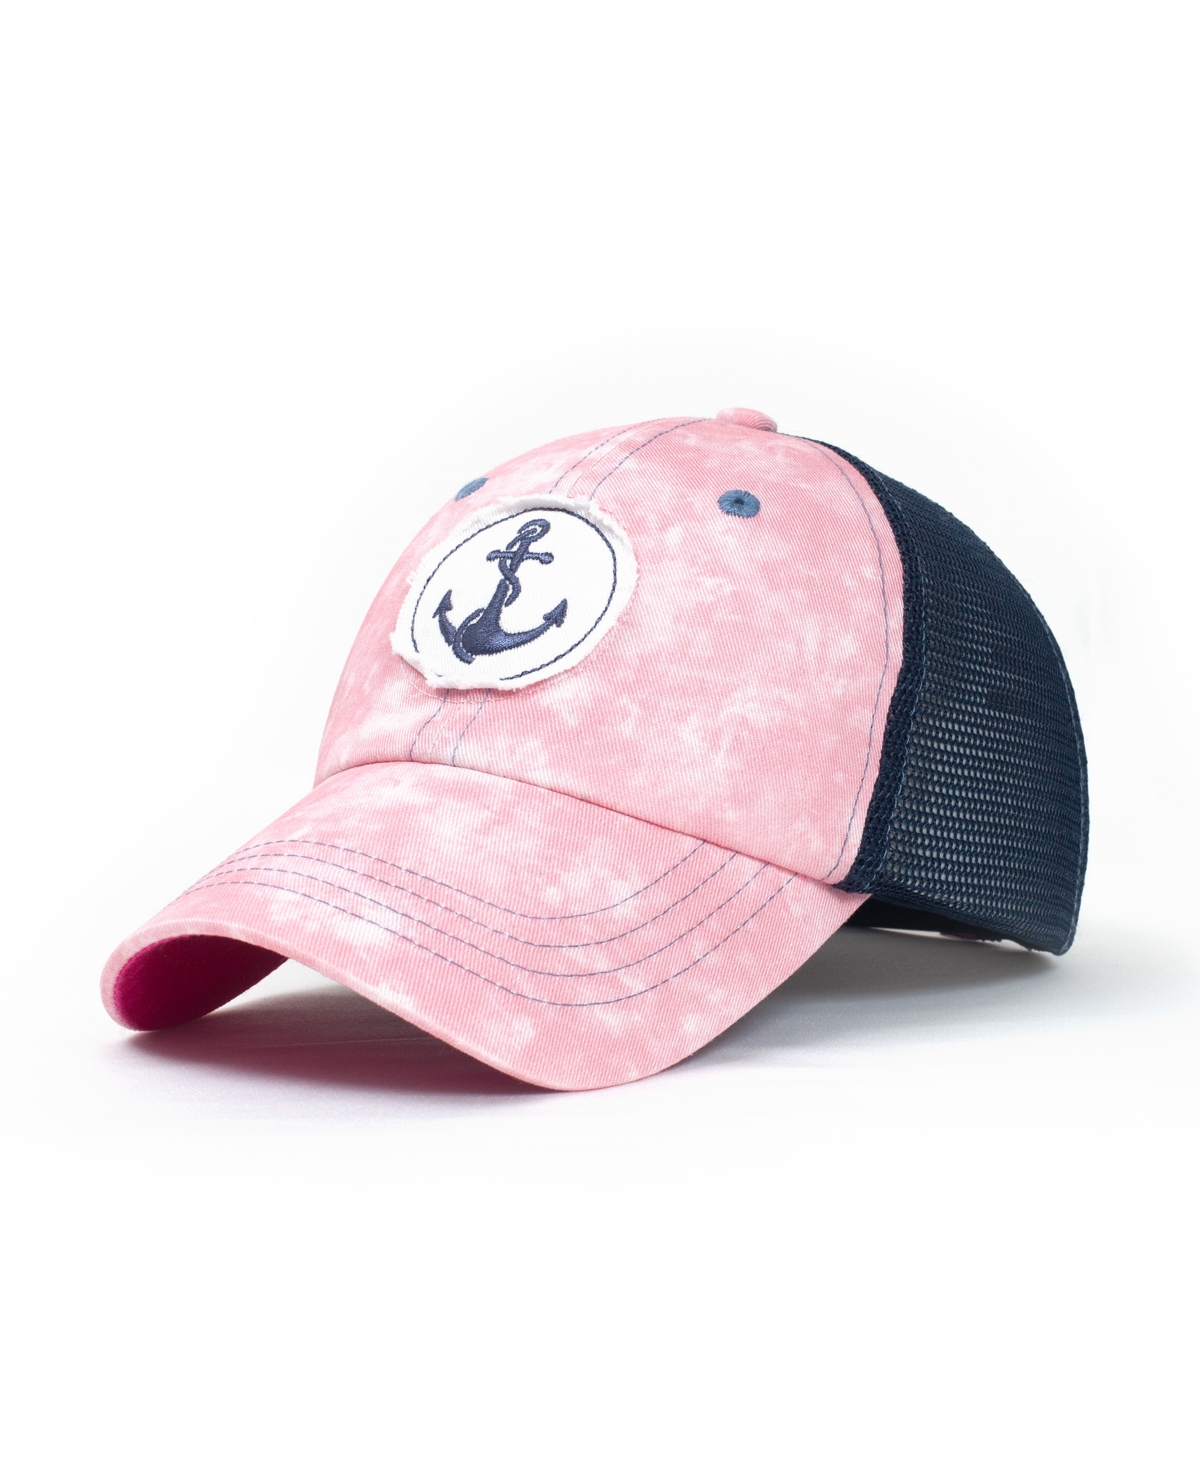 Shady Lady Matey Lady Women's Adjustable Snap Back Mesh Anchor Patch Trucker Hat In Pink,blue